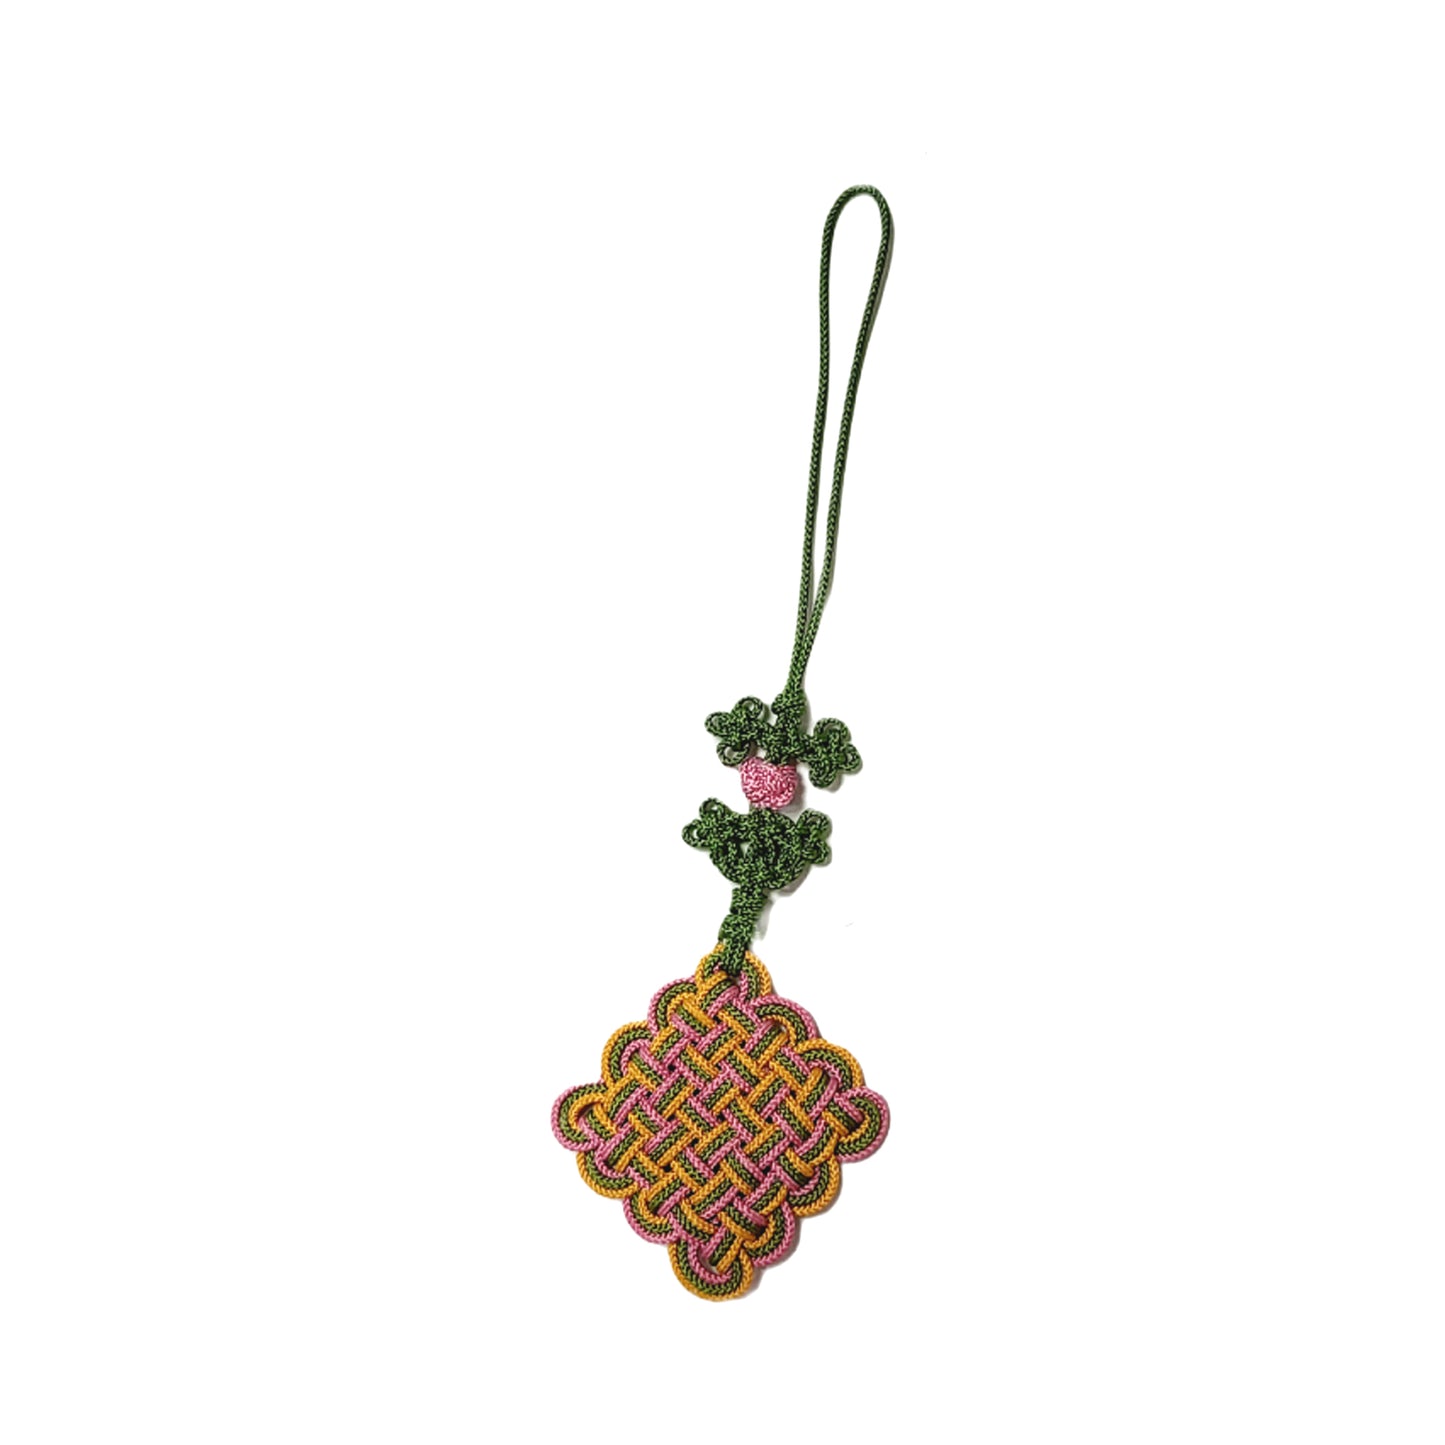 Korea traditional Knot, key ring, keychain, green, pink, yellow color